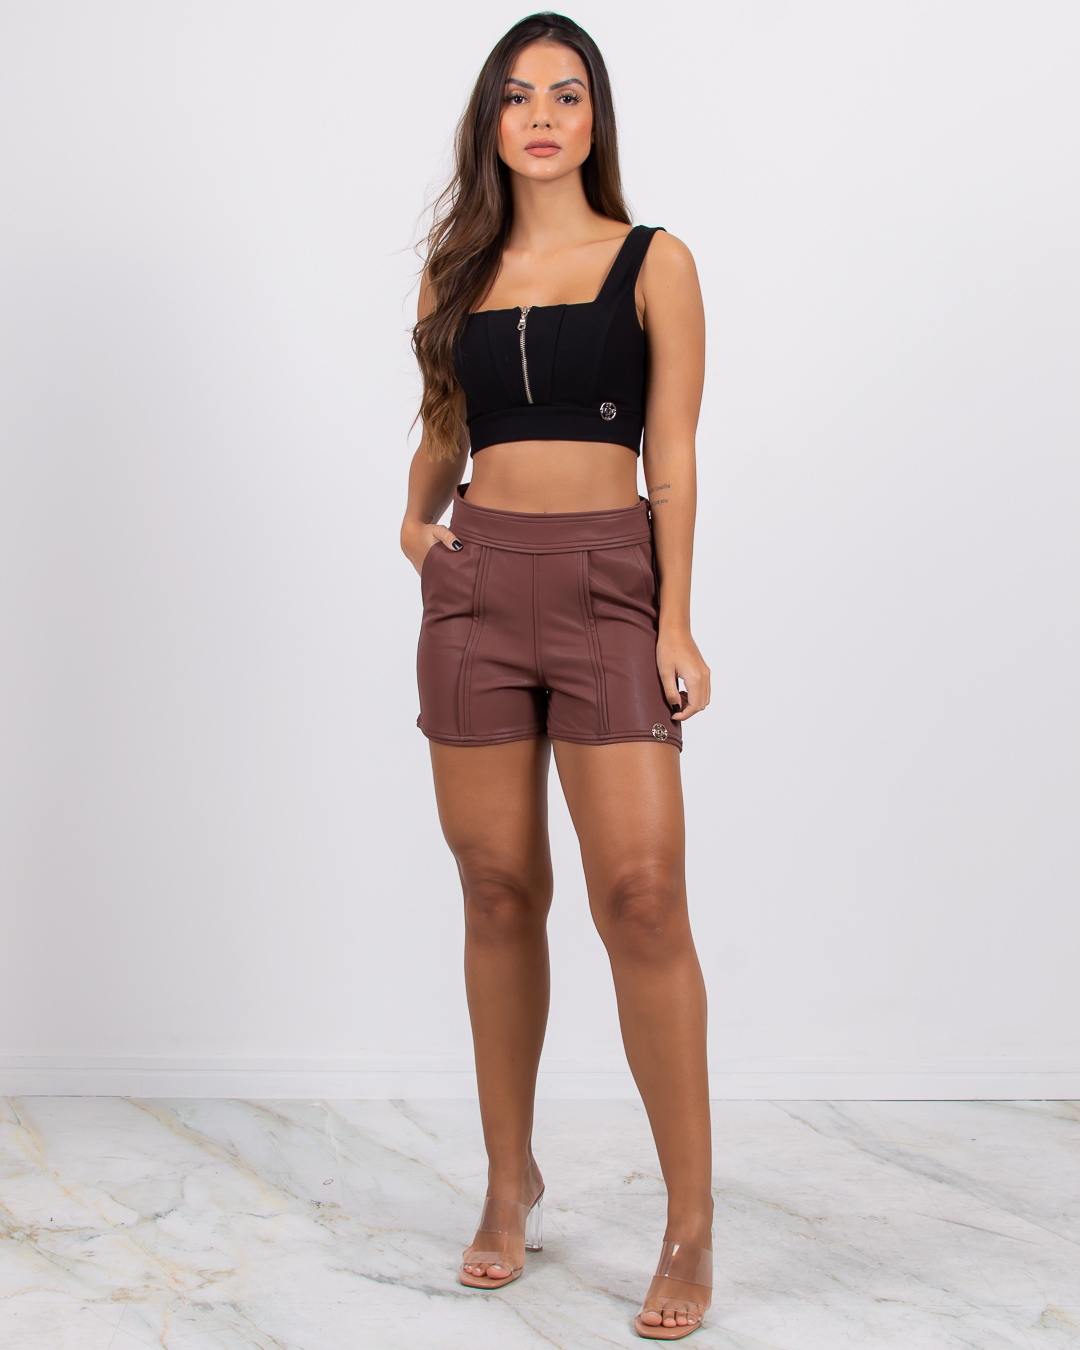 Miss Misses - Short Miss Misses Suede Leather with Brown Beading - 18301231